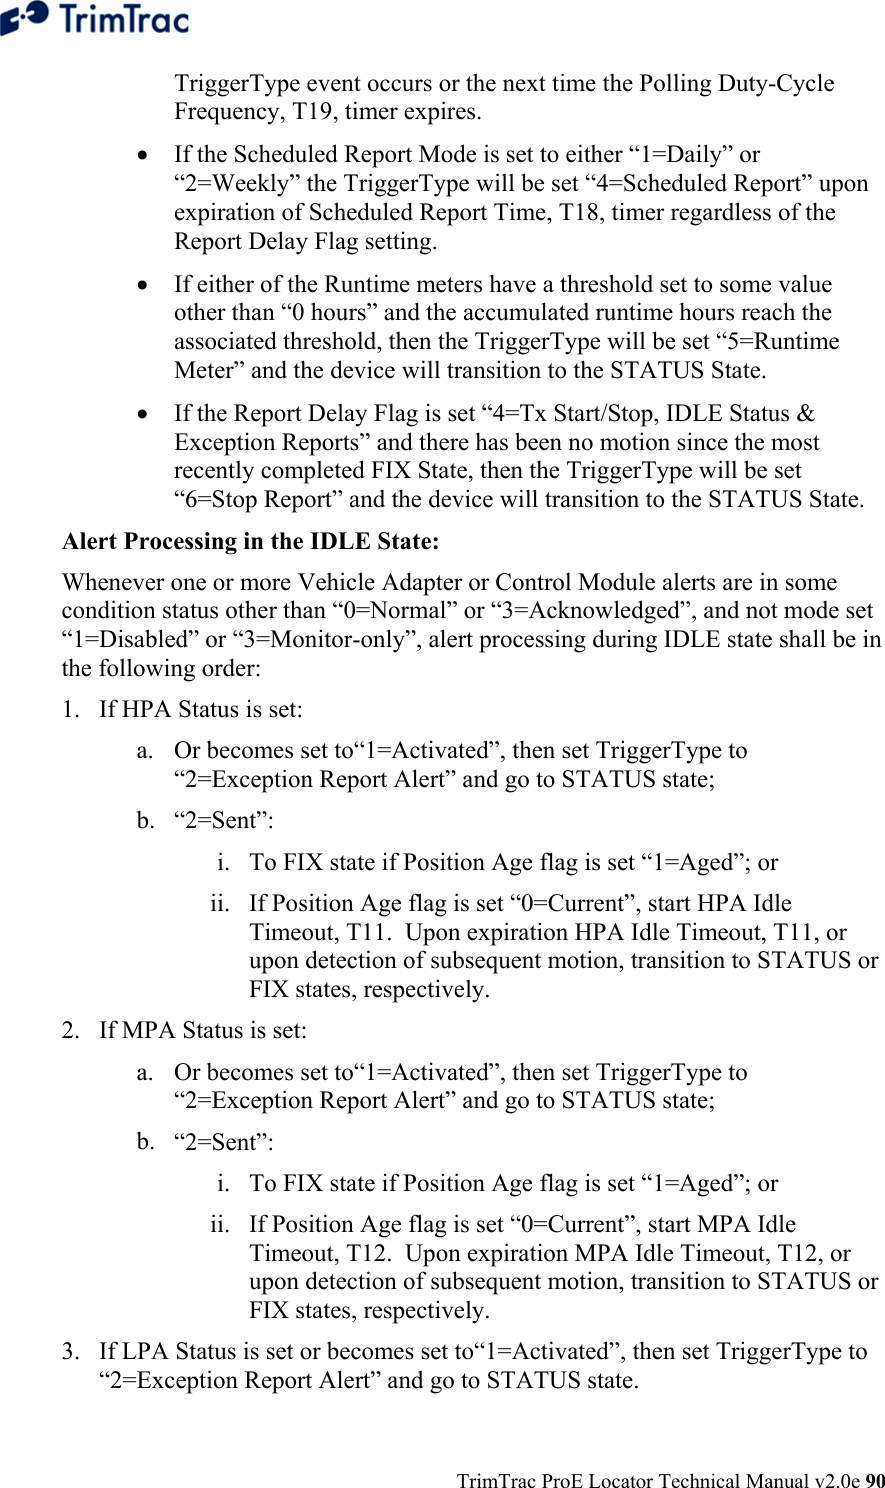  TrimTrac ProE Locator Technical Manual v2.0e 90 TriggerType event occurs or the next time the Polling Duty-Cycle Frequency, T19, timer expires.   • If the Scheduled Report Mode is set to either “1=Daily” or “2=Weekly” the TriggerType will be set “4=Scheduled Report” upon expiration of Scheduled Report Time, T18, timer regardless of the Report Delay Flag setting. • If either of the Runtime meters have a threshold set to some value other than “0 hours” and the accumulated runtime hours reach the associated threshold, then the TriggerType will be set “5=Runtime Meter” and the device will transition to the STATUS State. • If the Report Delay Flag is set “4=Tx Start/Stop, IDLE Status &amp; Exception Reports” and there has been no motion since the most recently completed FIX State, then the TriggerType will be set “6=Stop Report” and the device will transition to the STATUS State. Alert Processing in the IDLE State: Whenever one or more Vehicle Adapter or Control Module alerts are in some condition status other than “0=Normal” or “3=Acknowledged”, and not mode set “1=Disabled” or “3=Monitor-only”, alert processing during IDLE state shall be in the following order: 1. If HPA Status is set: a. Or becomes set to“1=Activated”, then set TriggerType to “2=Exception Report Alert” and go to STATUS state; b. “2=Sent”: i. To FIX state if Position Age flag is set “1=Aged”; or ii. If Position Age flag is set “0=Current”, start HPA Idle Timeout, T11.  Upon expiration HPA Idle Timeout, T11, or upon detection of subsequent motion, transition to STATUS or FIX states, respectively. 2. If MPA Status is set: a. Or becomes set to“1=Activated”, then set TriggerType to “2=Exception Report Alert” and go to STATUS state; b. “2=Sent”: i. To FIX state if Position Age flag is set “1=Aged”; or ii. If Position Age flag is set “0=Current”, start MPA Idle Timeout, T12.  Upon expiration MPA Idle Timeout, T12, or upon detection of subsequent motion, transition to STATUS or FIX states, respectively. 3. If LPA Status is set or becomes set to“1=Activated”, then set TriggerType to “2=Exception Report Alert” and go to STATUS state. 